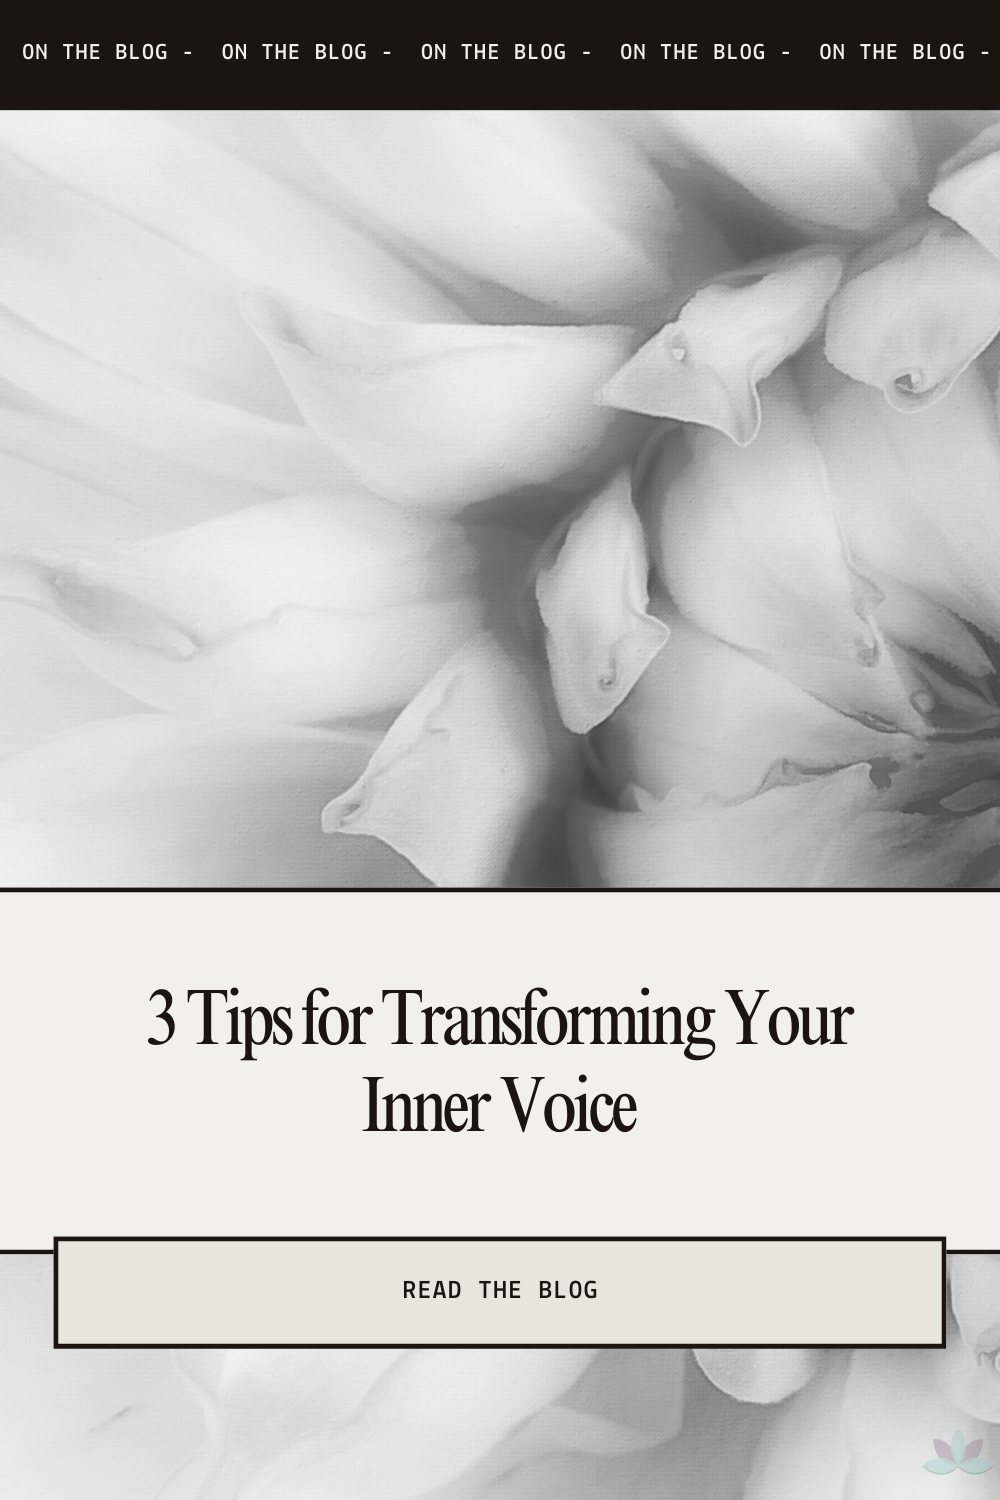 3 Tips for Transforming Your Inner Voice